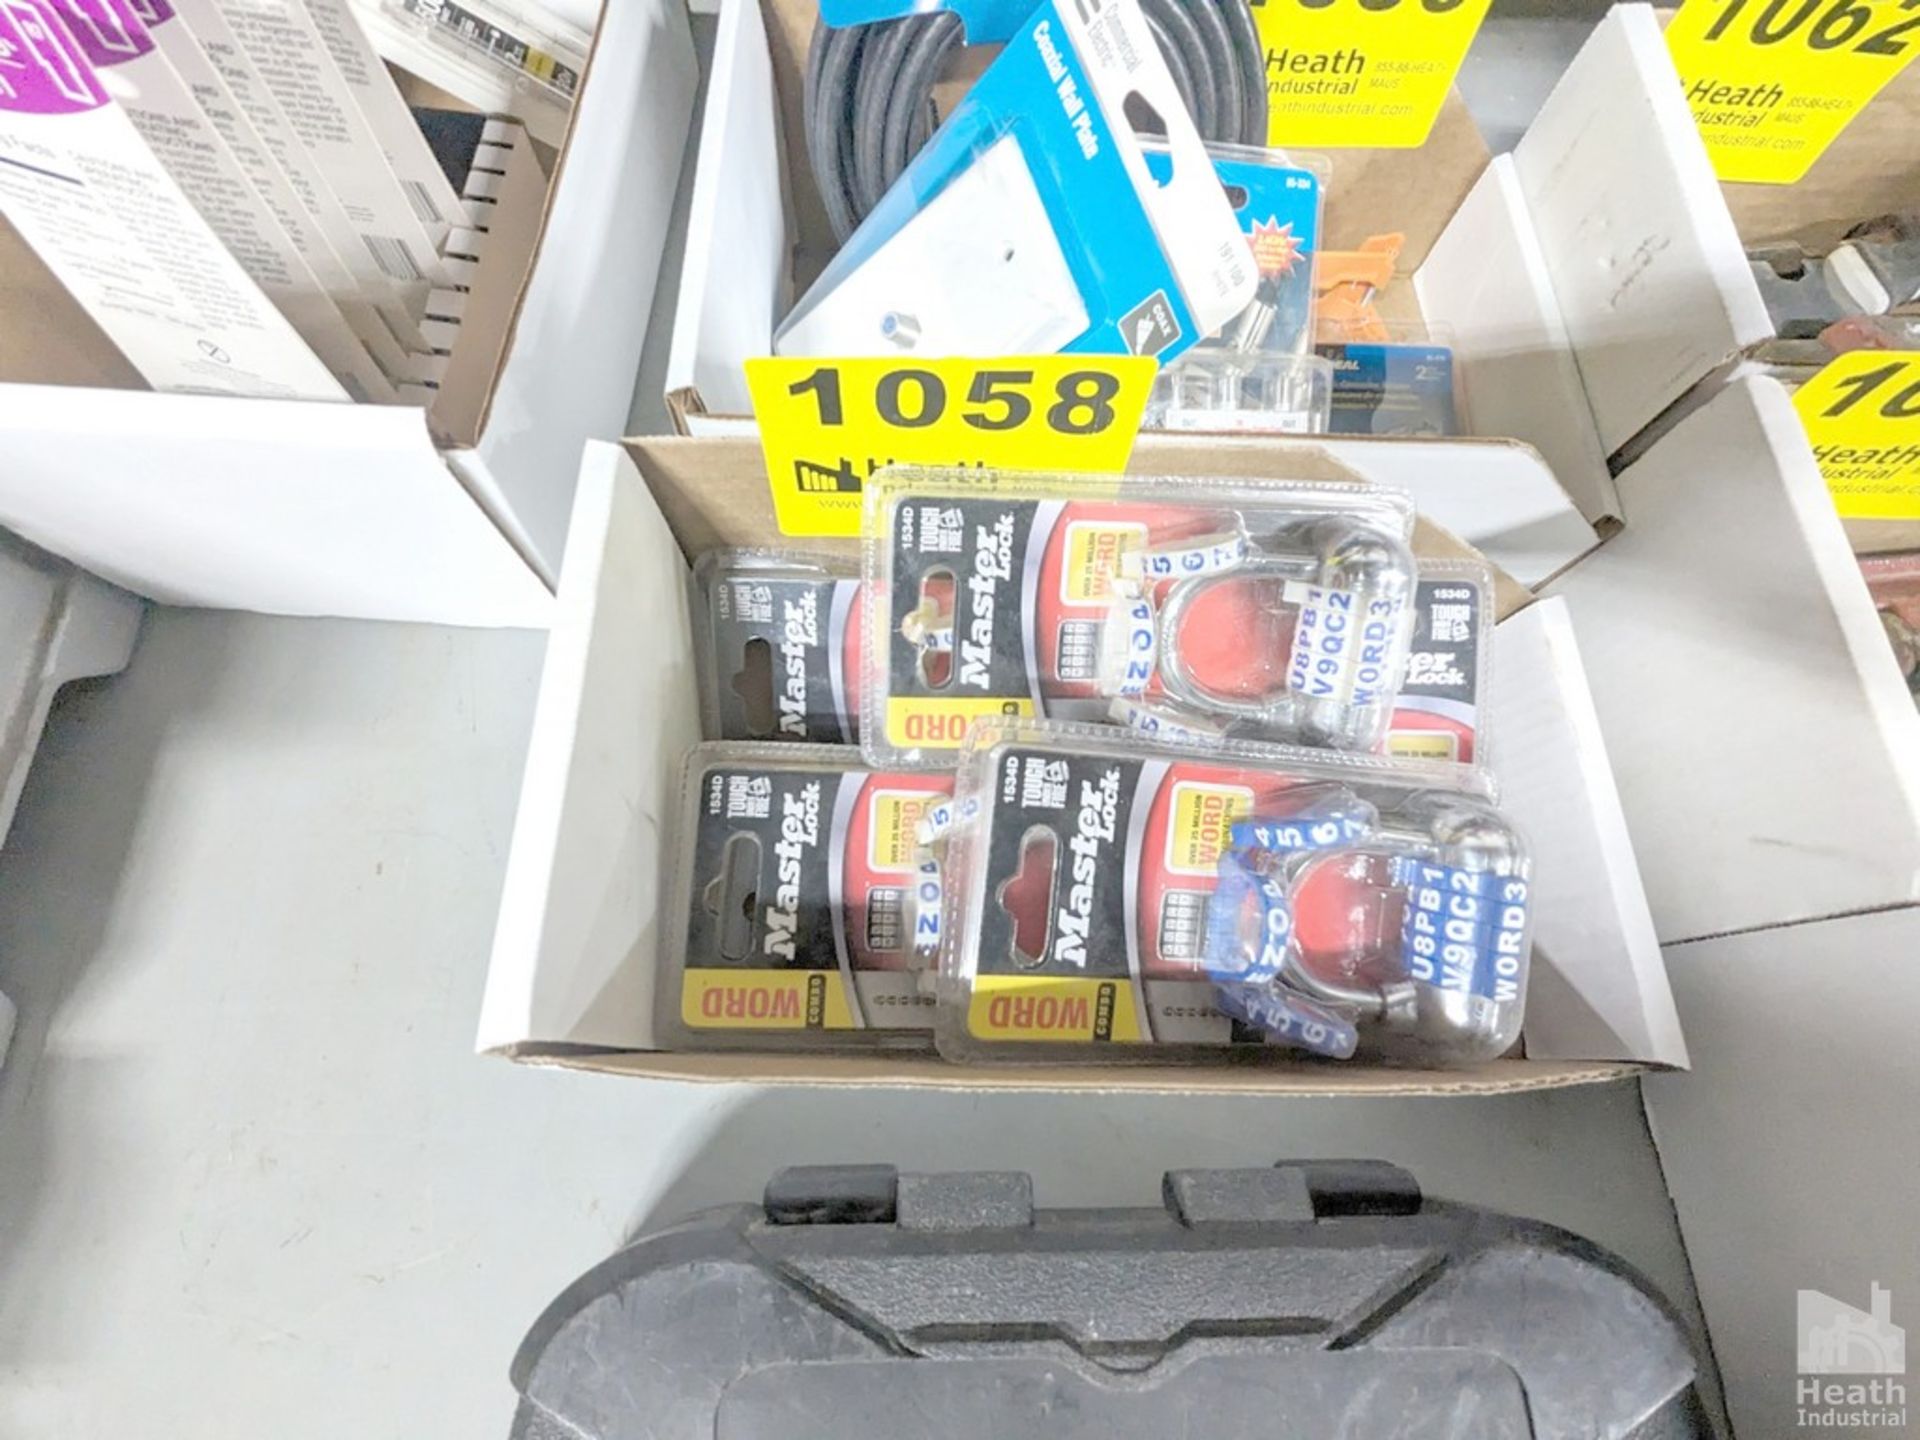 LARGE QUANTITY OF "WORD" COMBINATION LOCKS IN BOX